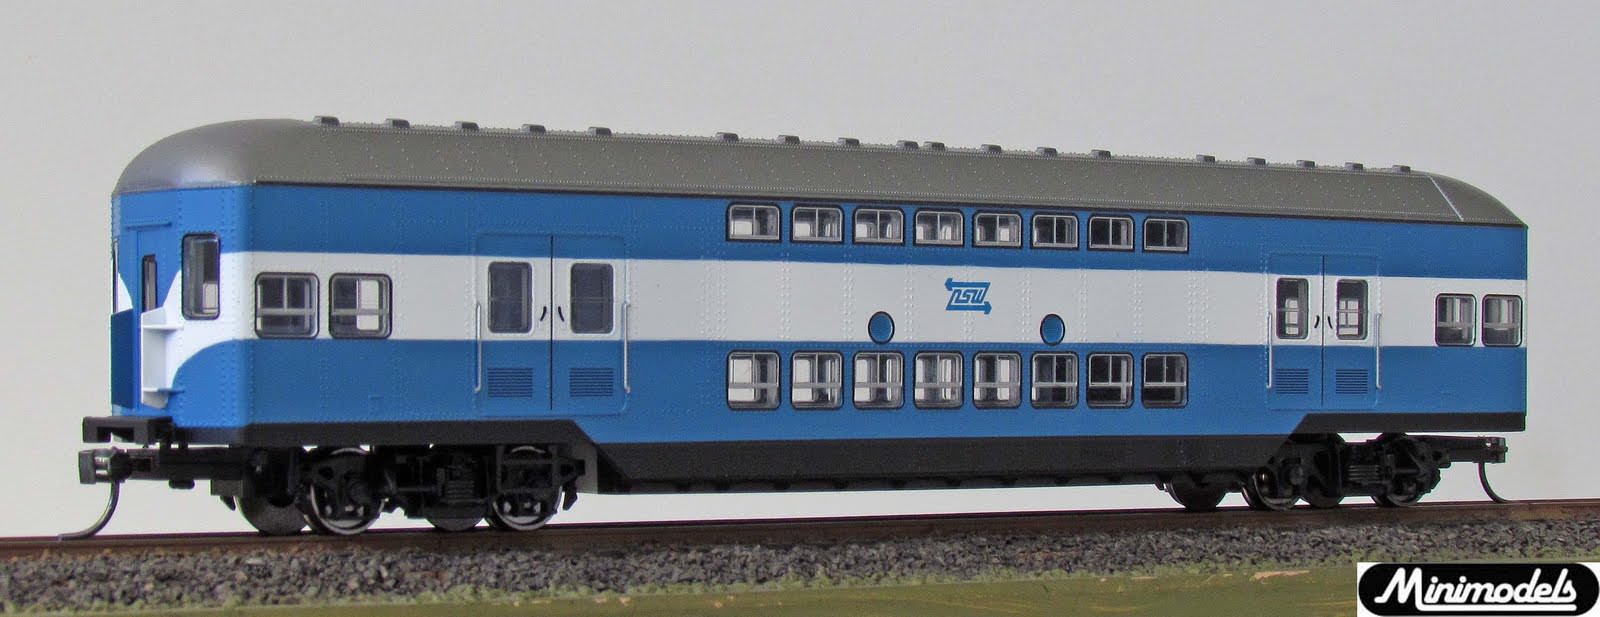 NSWR 1964 TULLOCH DOUBLE DECK ELECTRIC SUBURBAN TRAILER CAR BLUE/ LOW WHITE BAND 